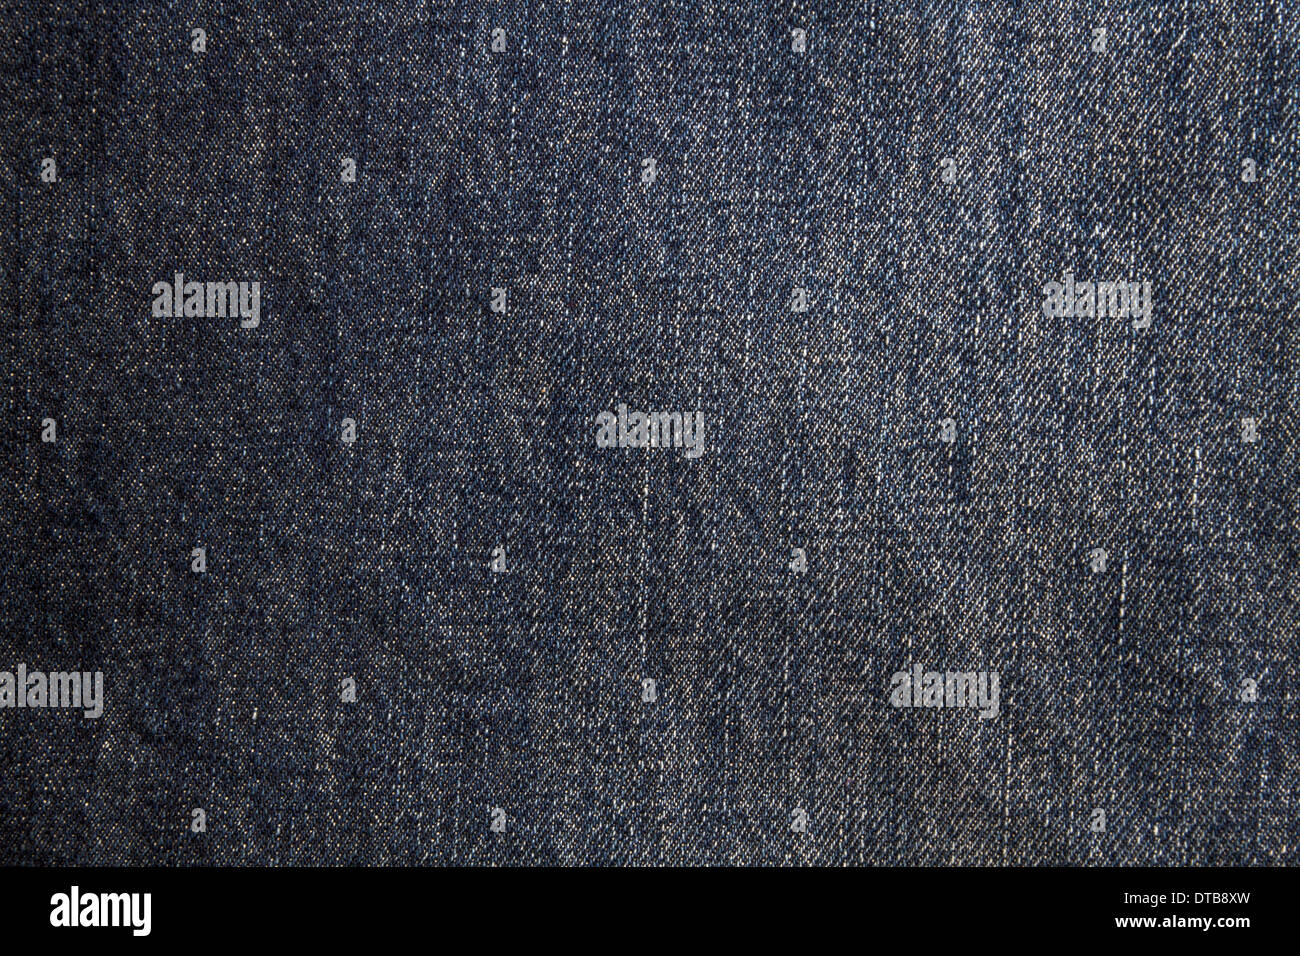 Texture of black fabric background Stock Photo